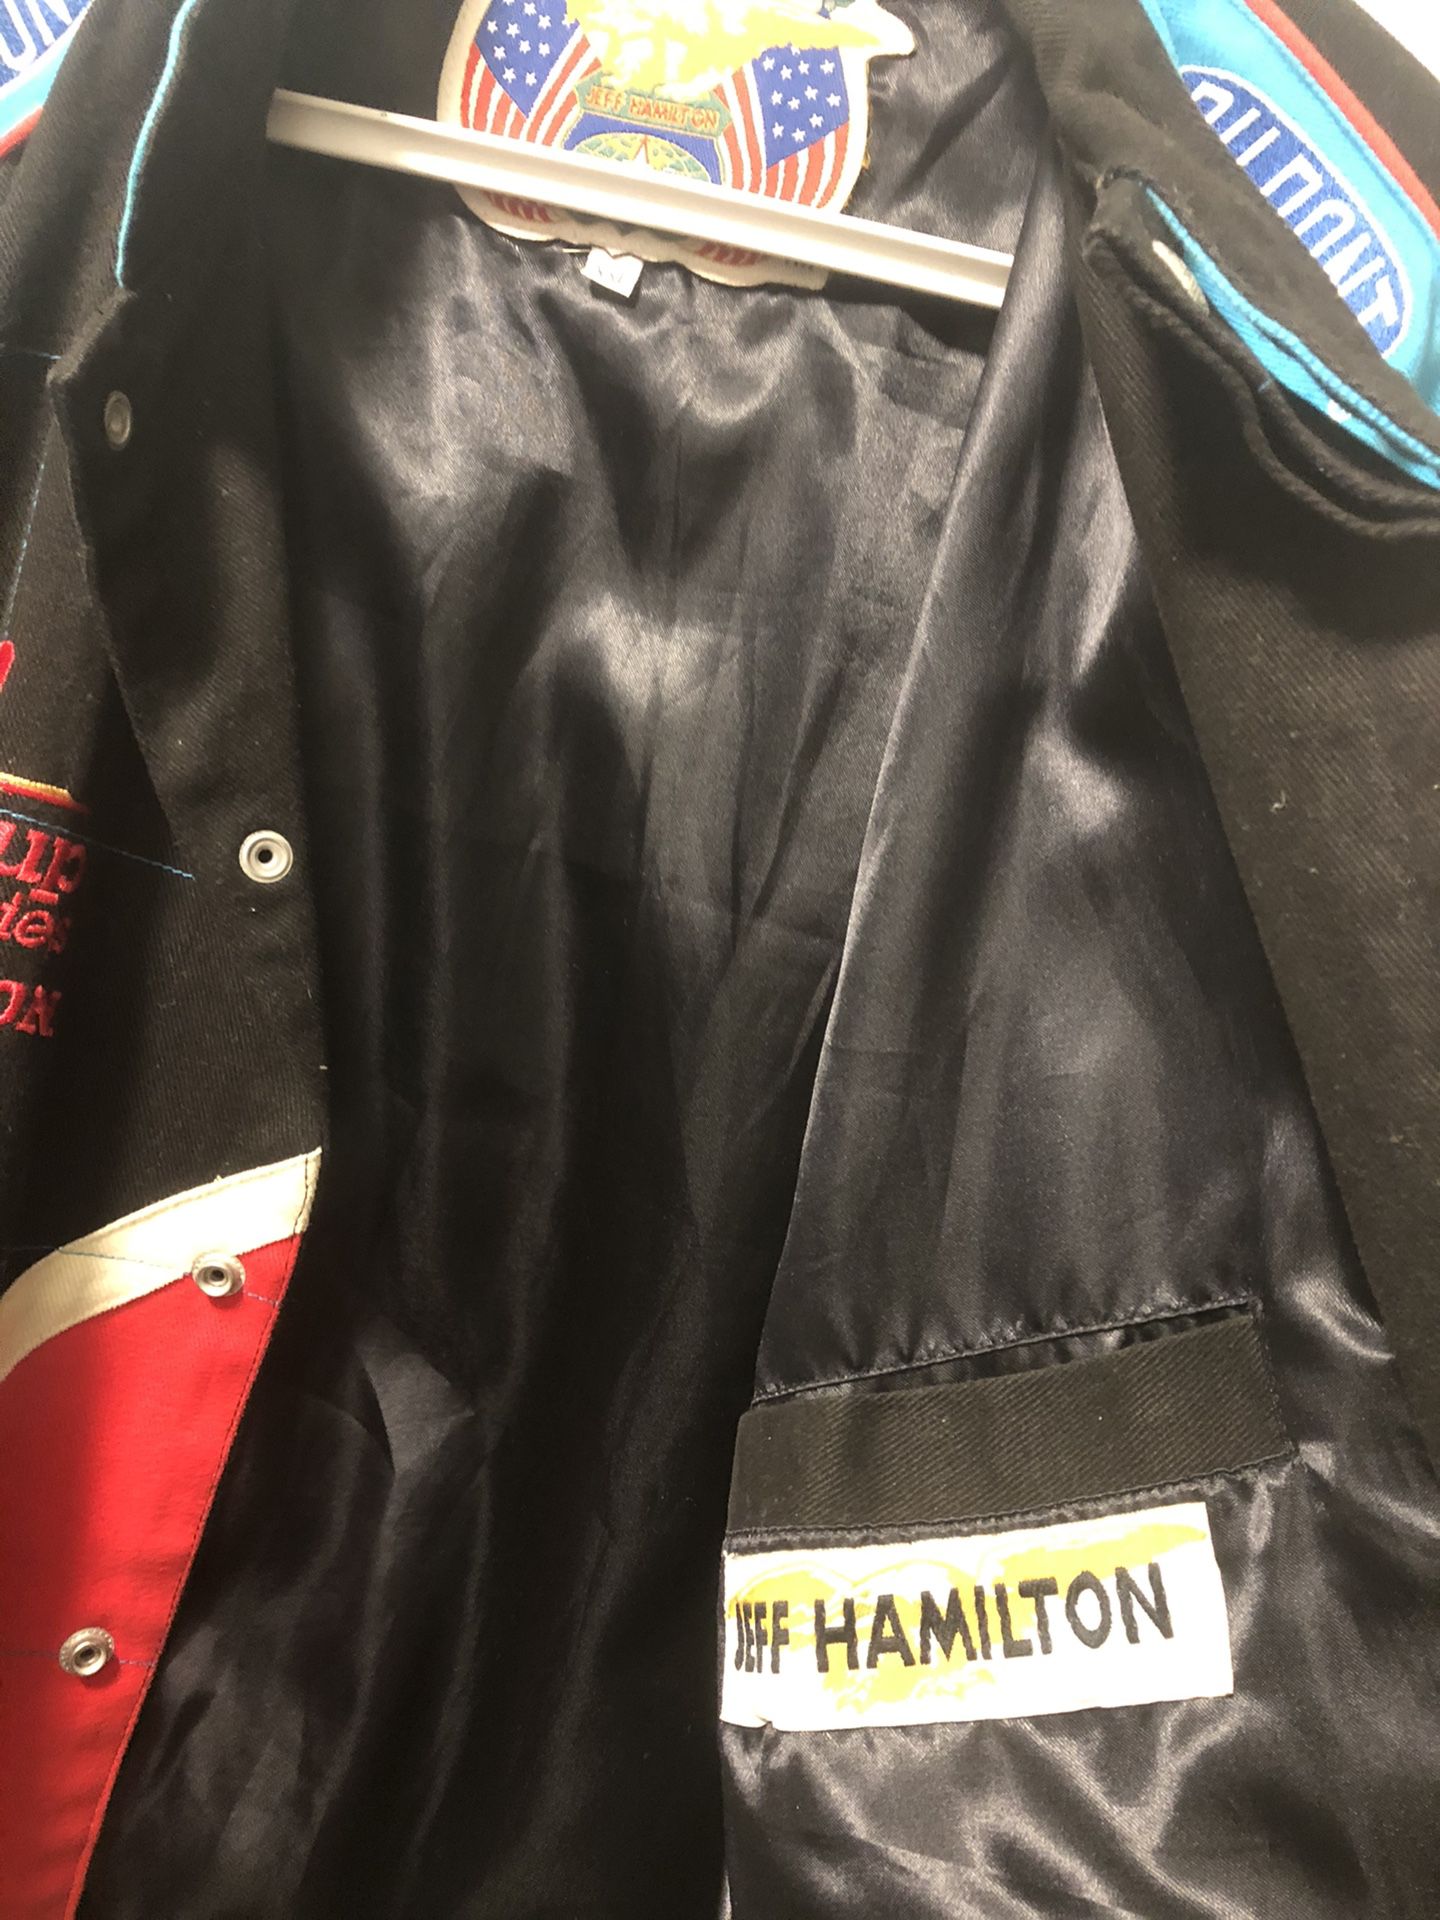 Jeff Hamilton Mexico NASCAR for Sale in Bellwood, IL - OfferUp